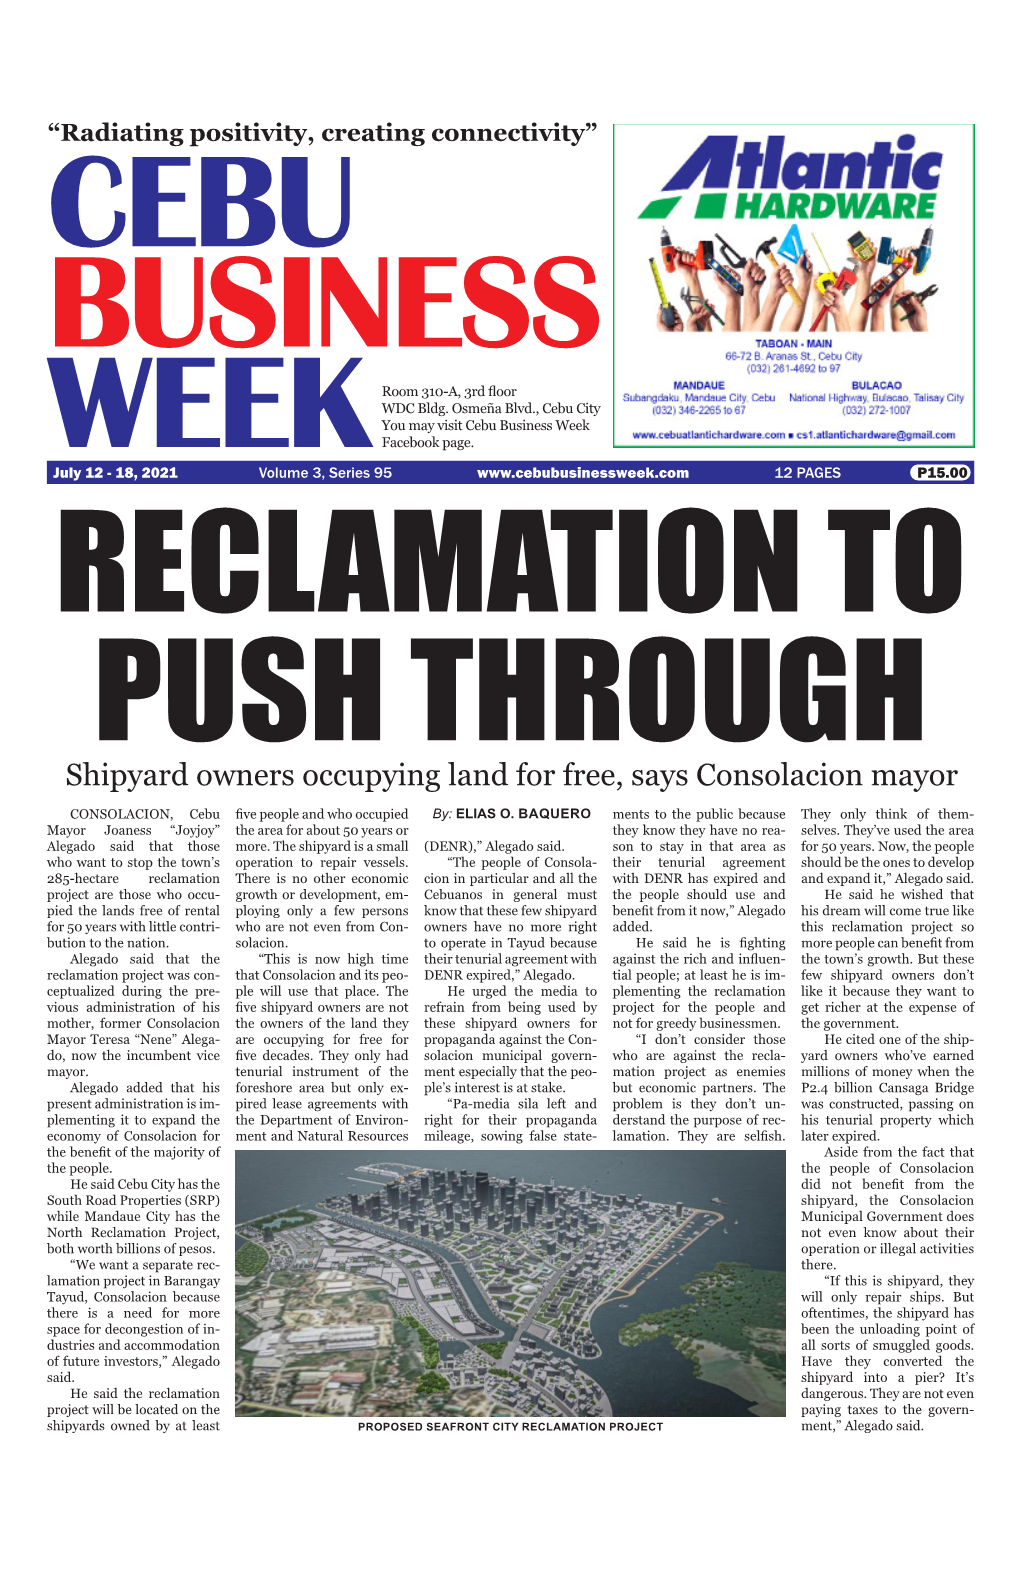 Shipyard Owners Occupying Land for Free, Says Consolacion Mayor